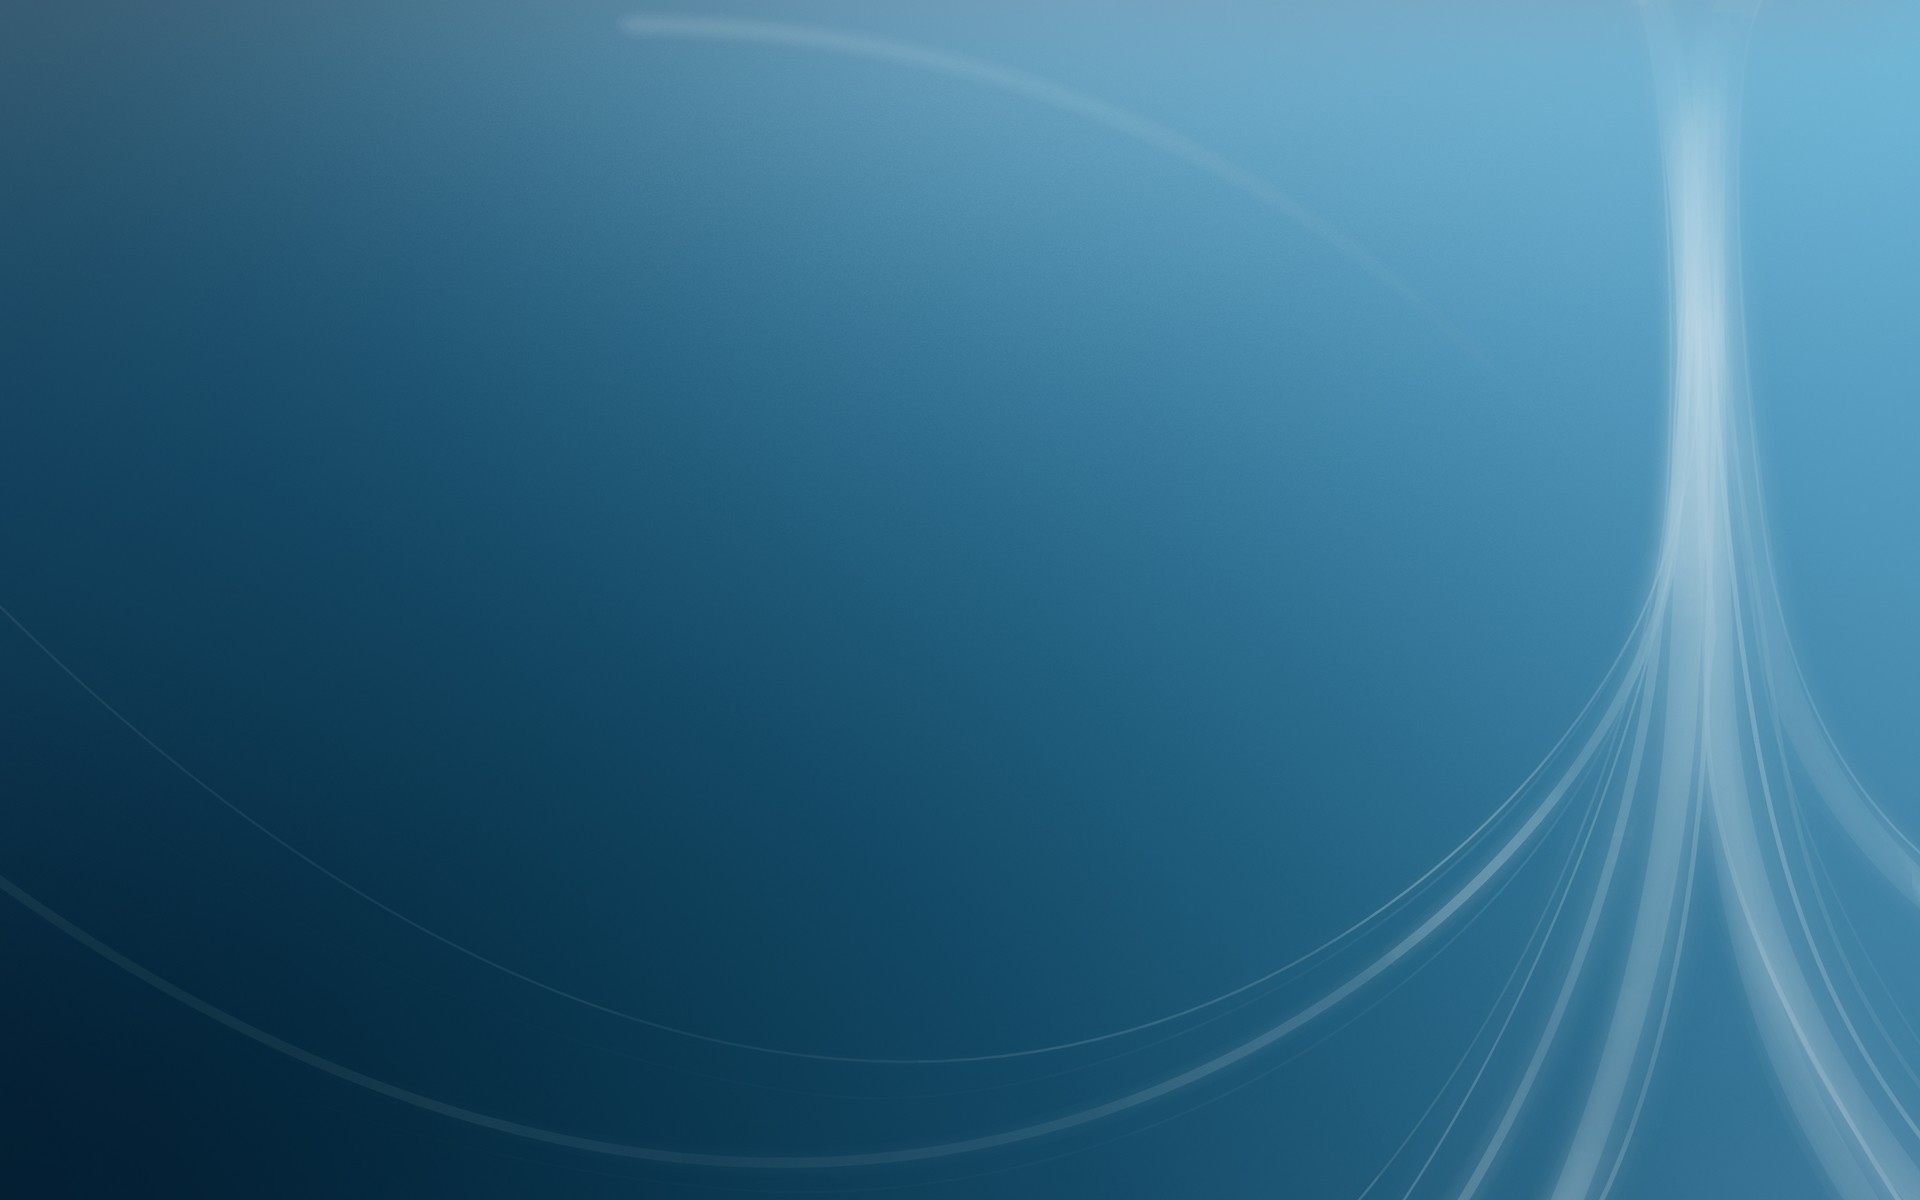 Fedora Linux Wallpaper 60 pictures